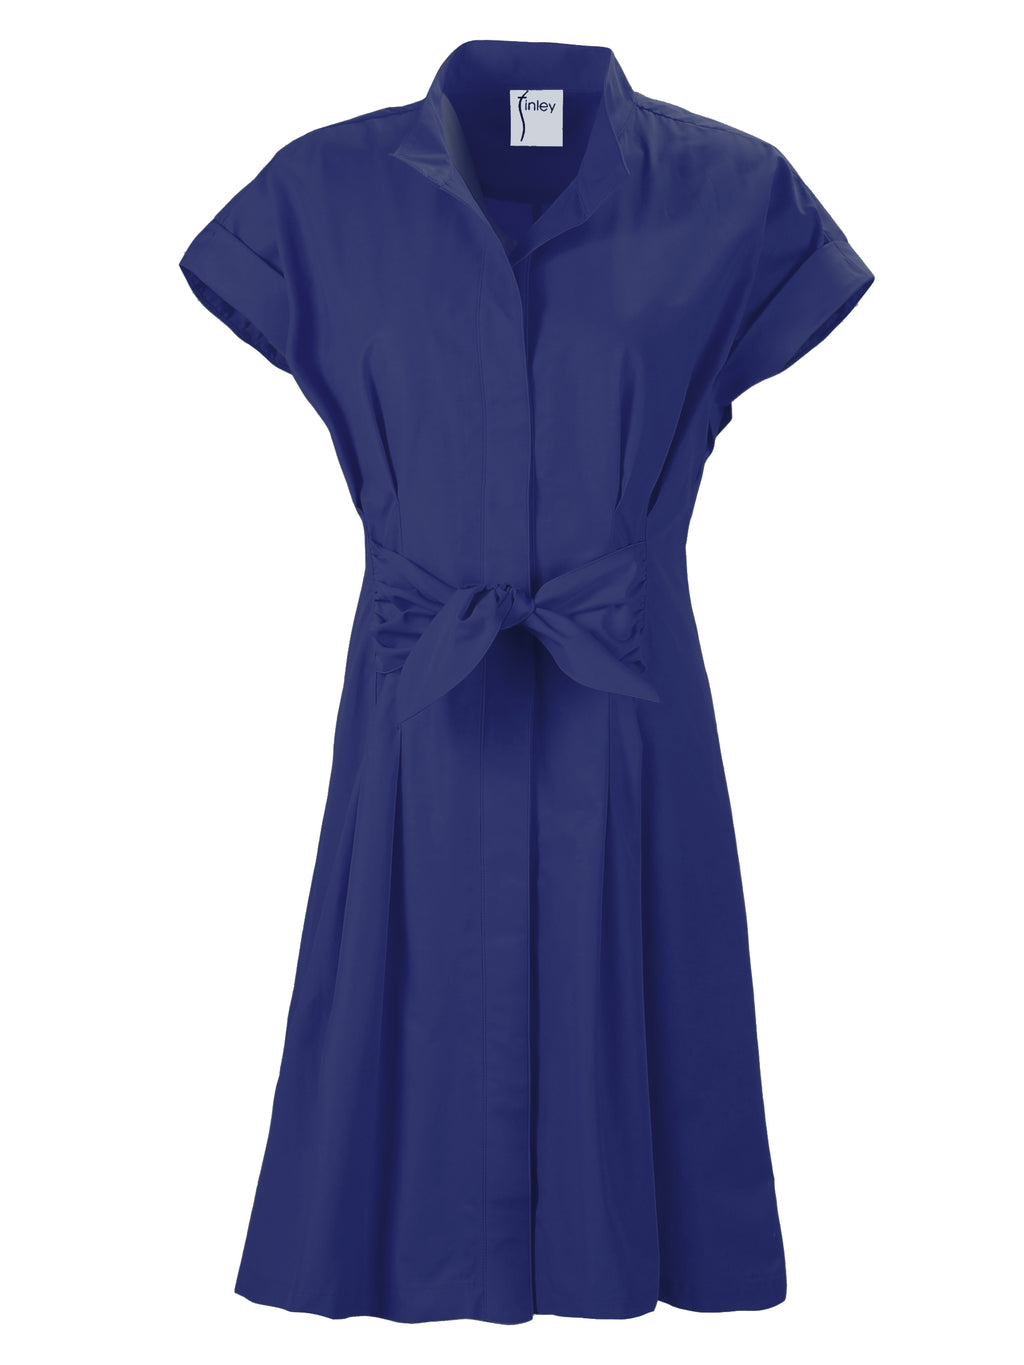 Navy Blue Fit and Flare Short Sleeve Dress | Finley Shirts